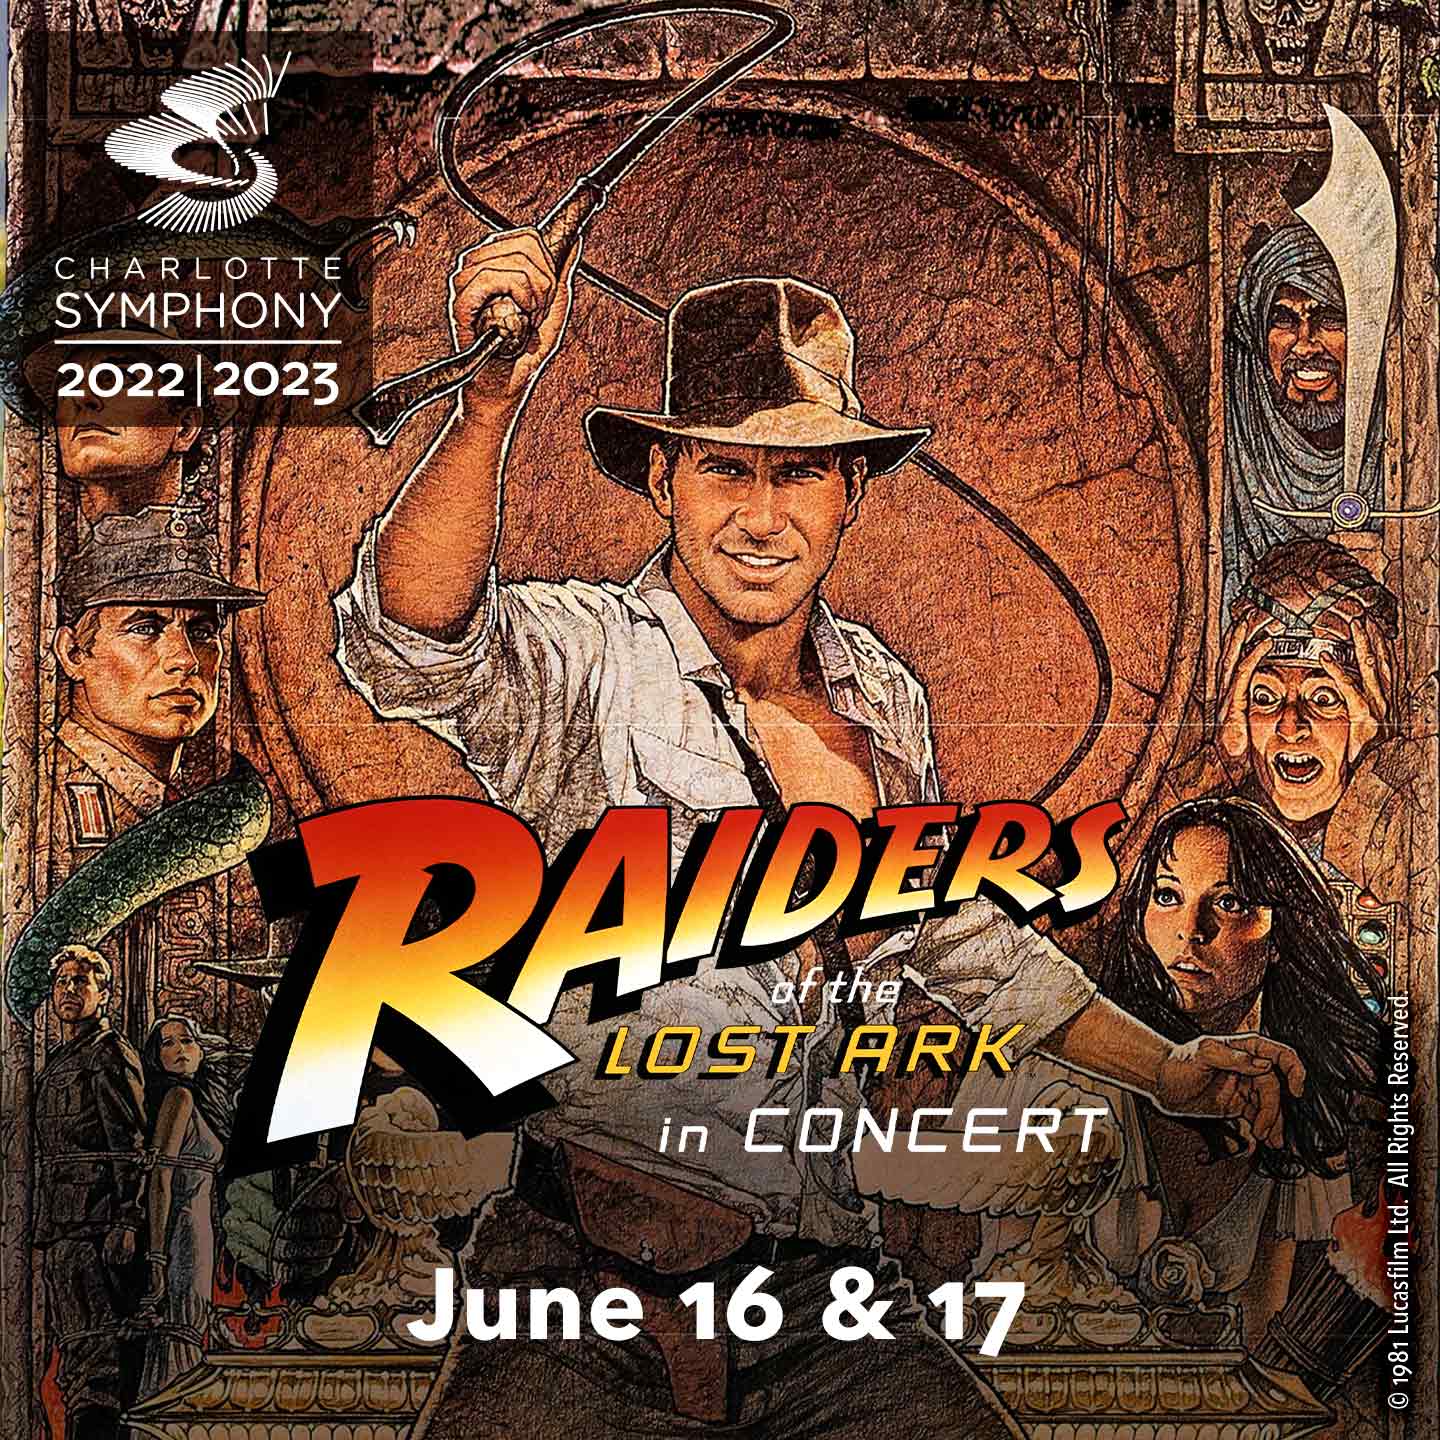 Charlotte Symphony: Raiders of the Lost Ark in Concert